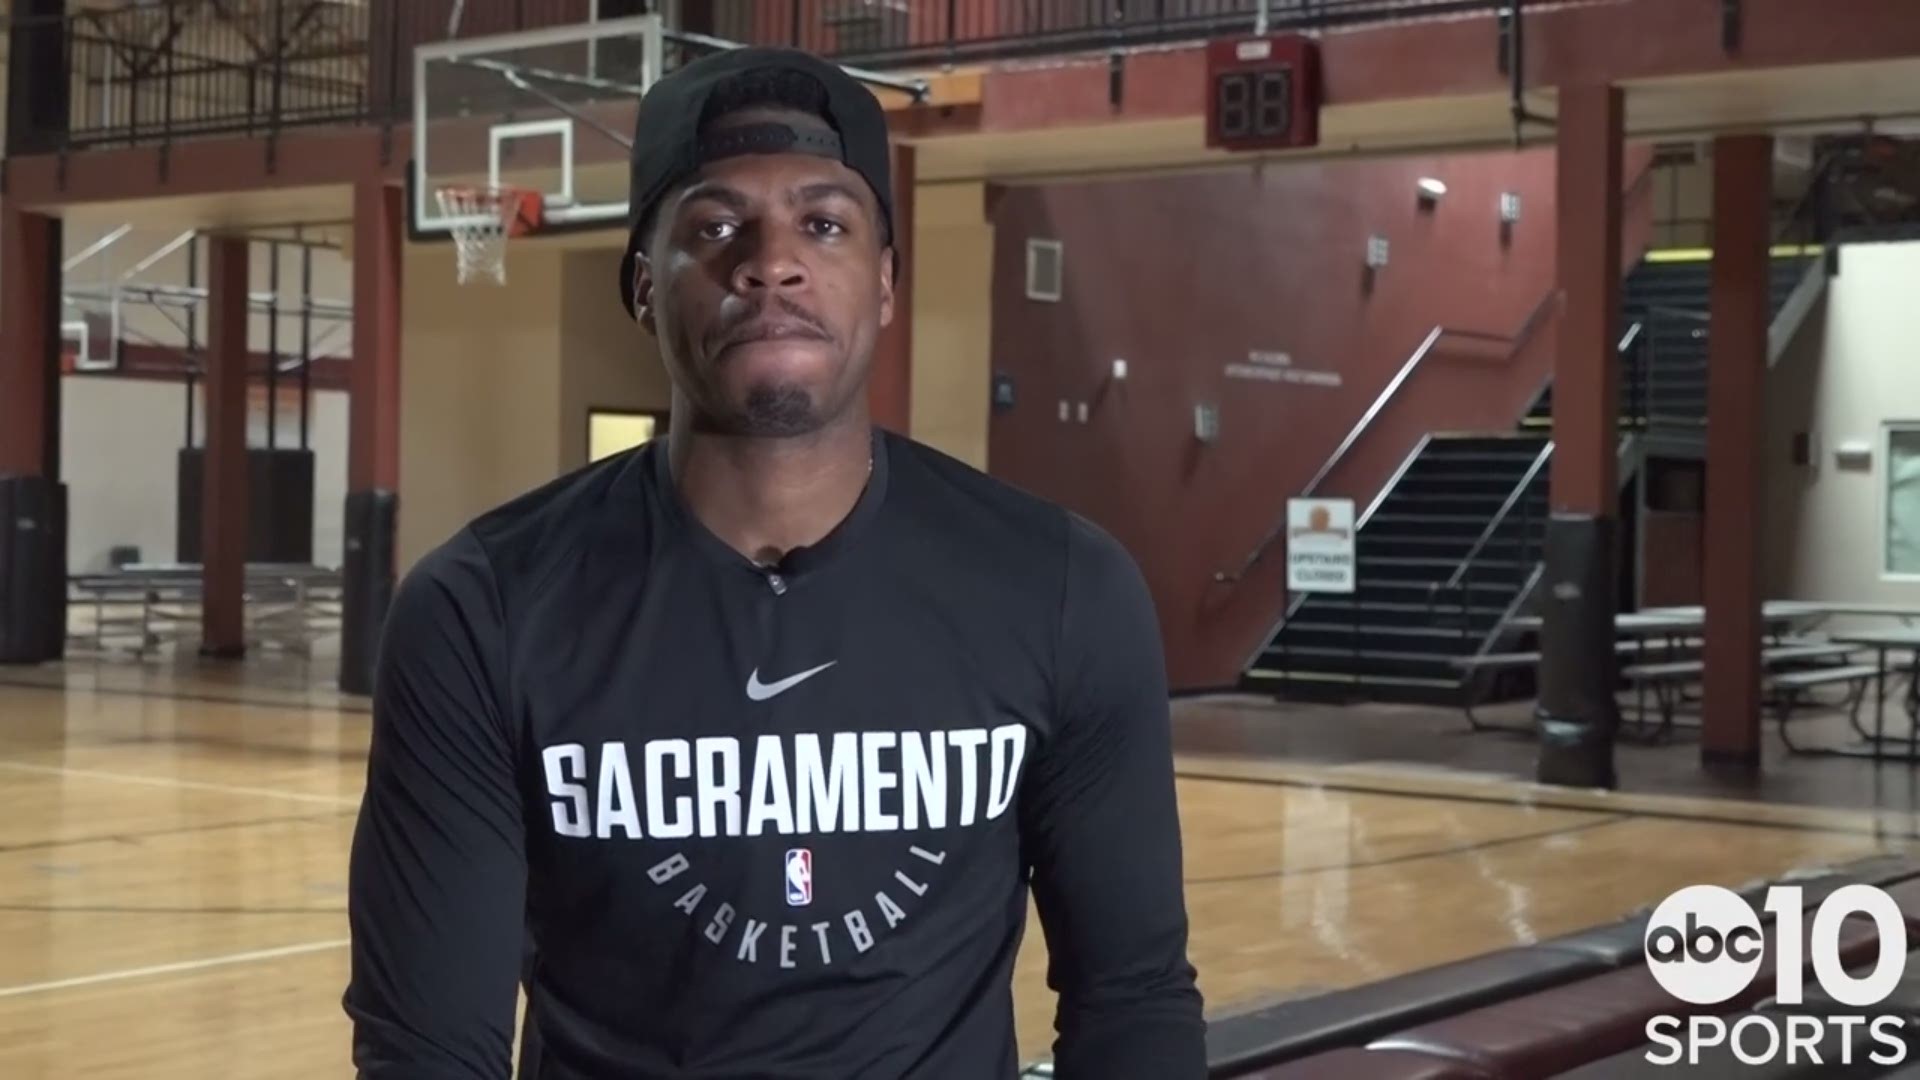 Kings guard Buddy Hield talks with ABC10's Sean Cunningham about his youth basketball camp in Rocklin, interacting and competing with kids, his new coach Luke Walton, the thirst to get his team in the playoffs and the bright future in Sacramento.